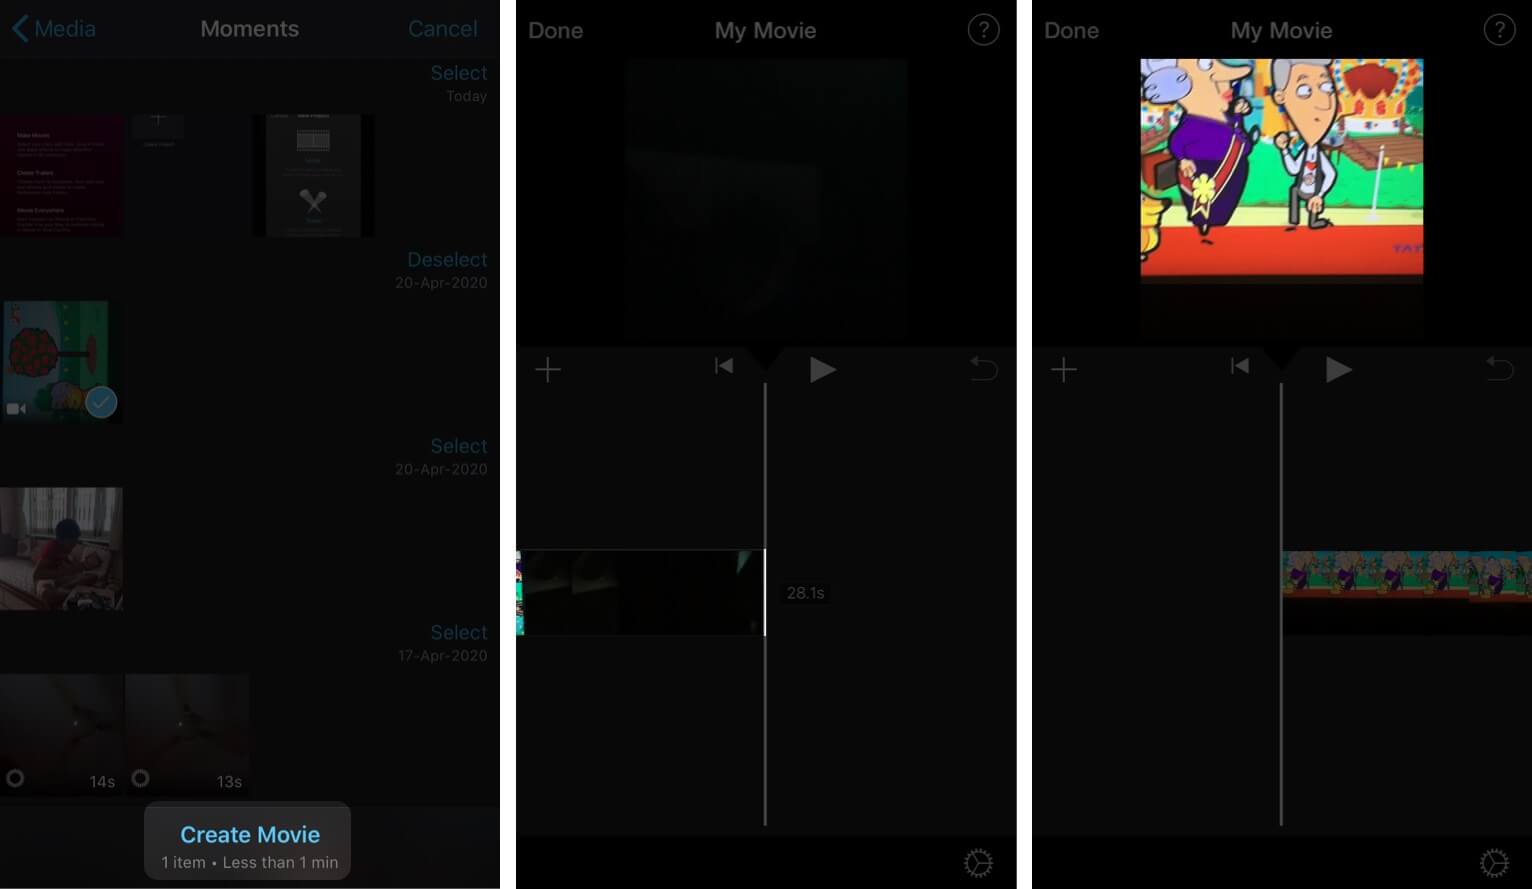 Tap on Create Movie and import Video to iMovie